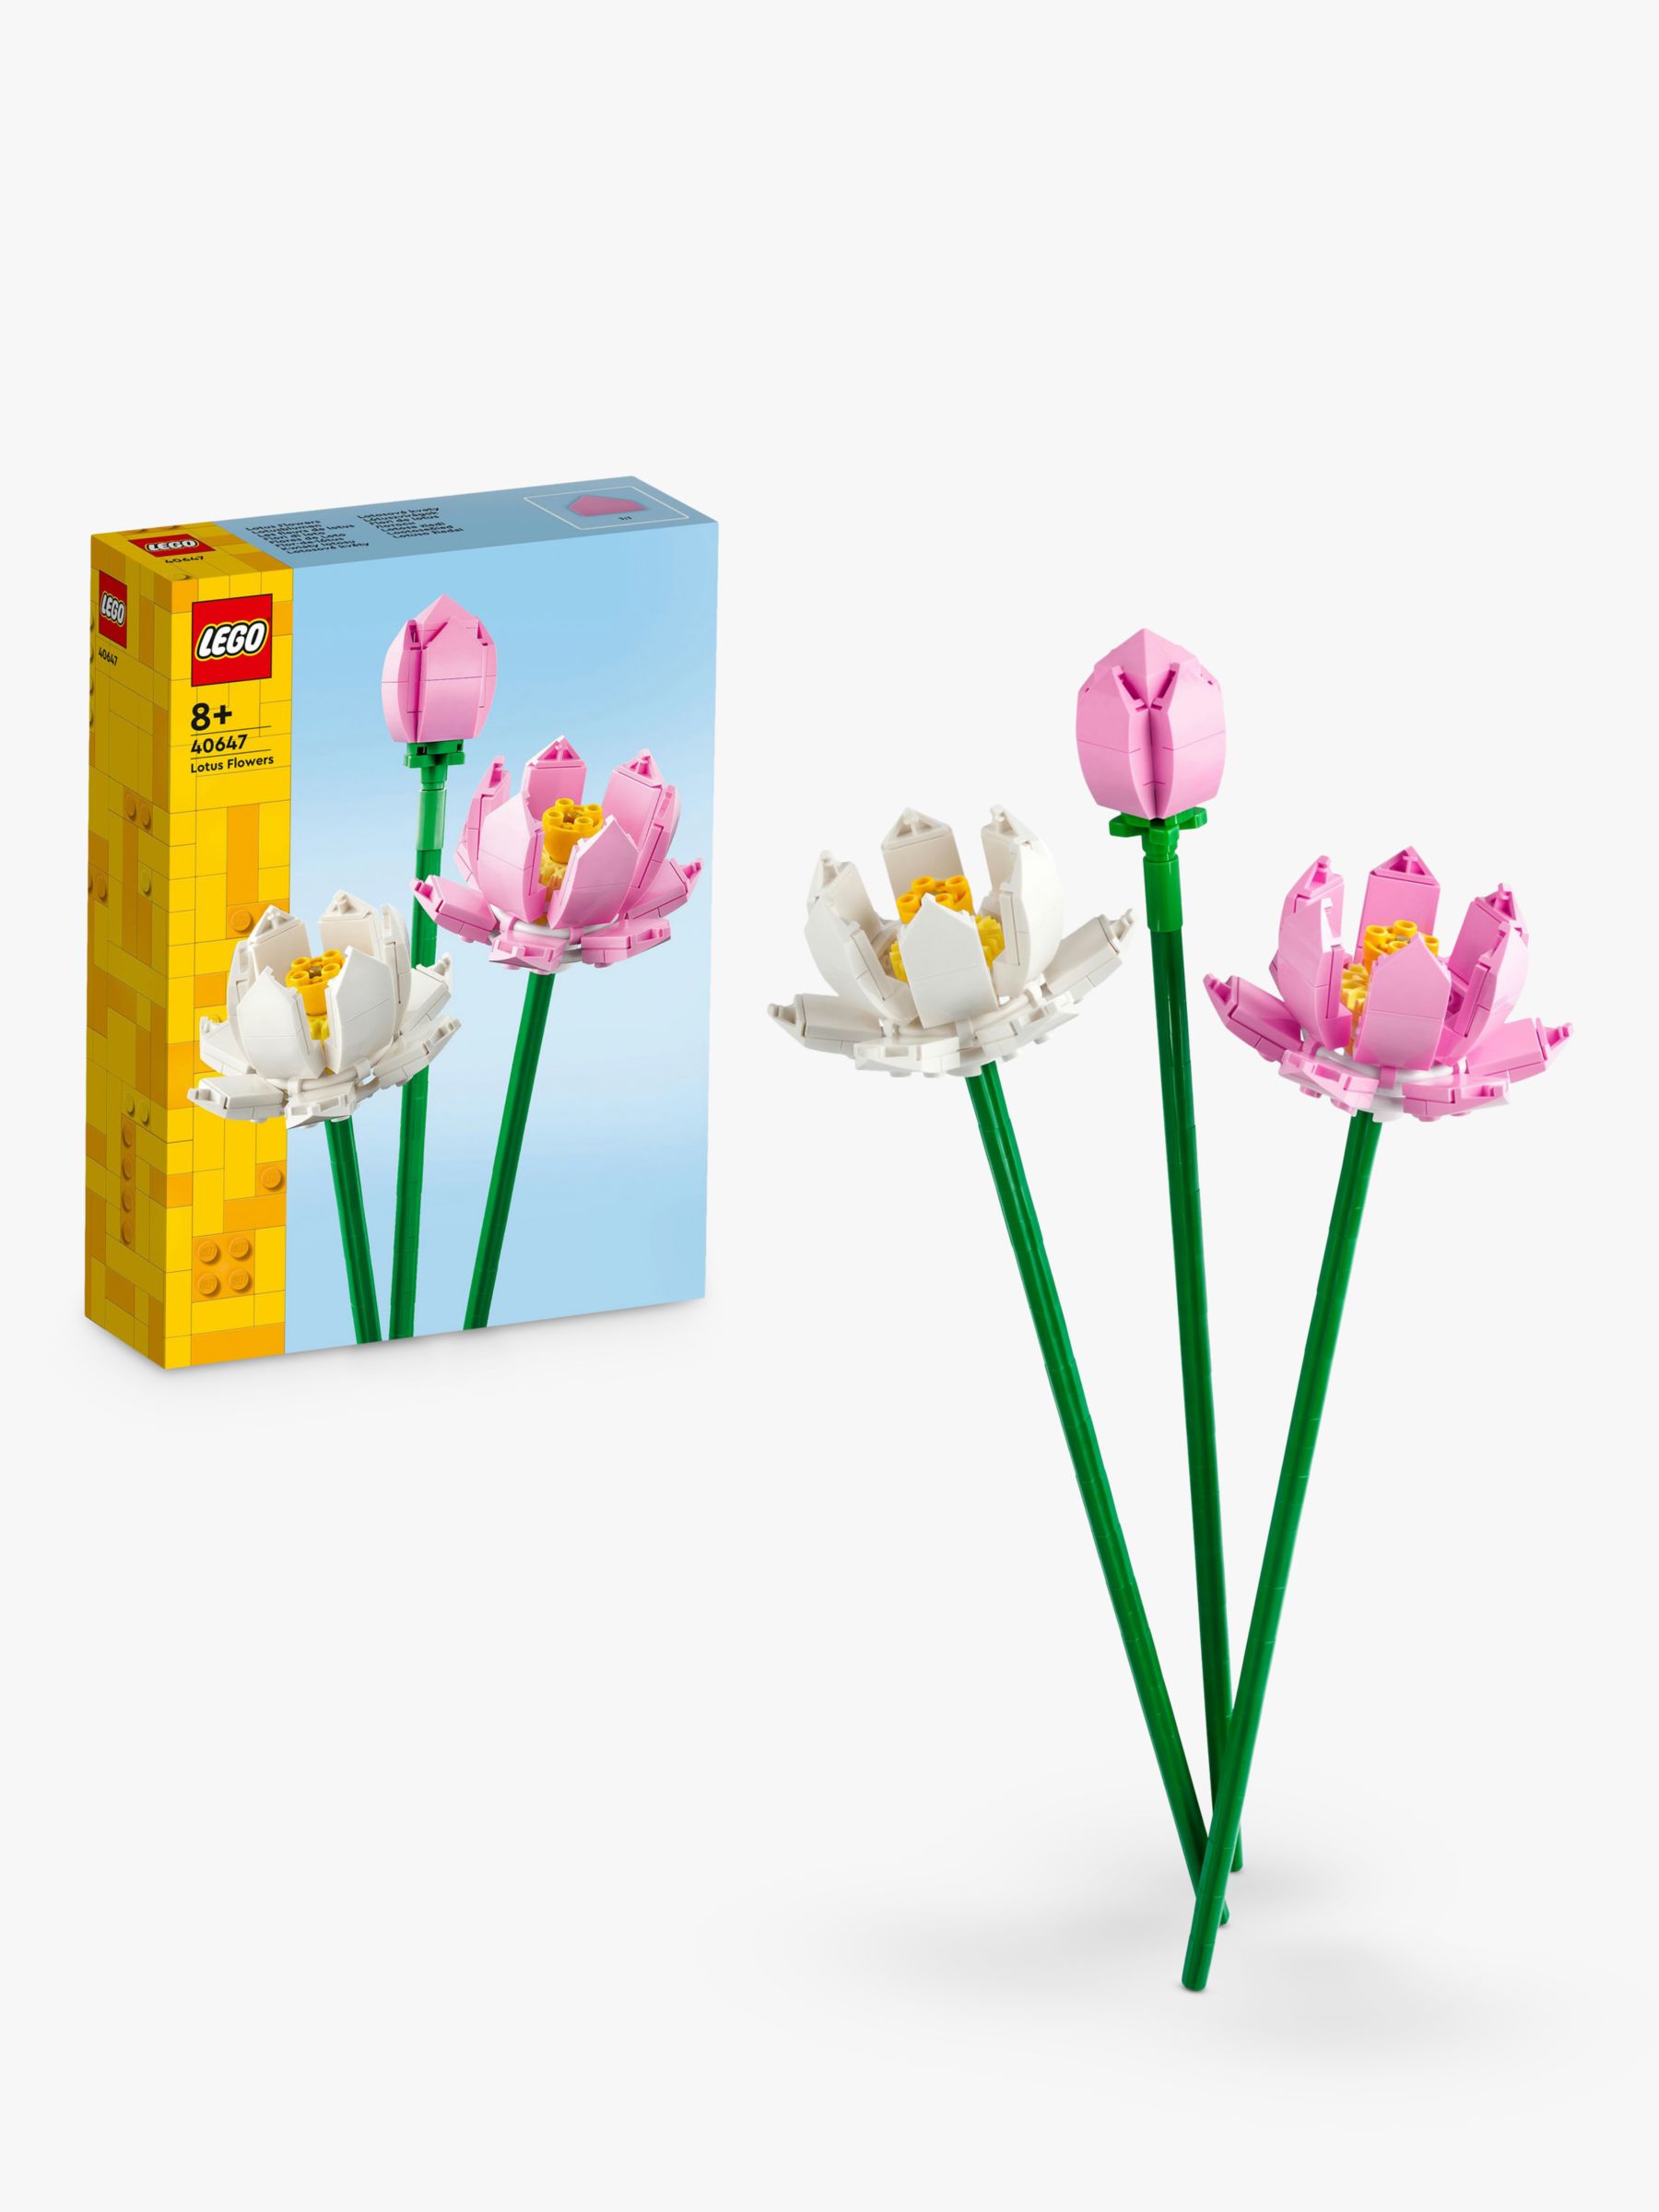 Lotus Flowers 40647, Other